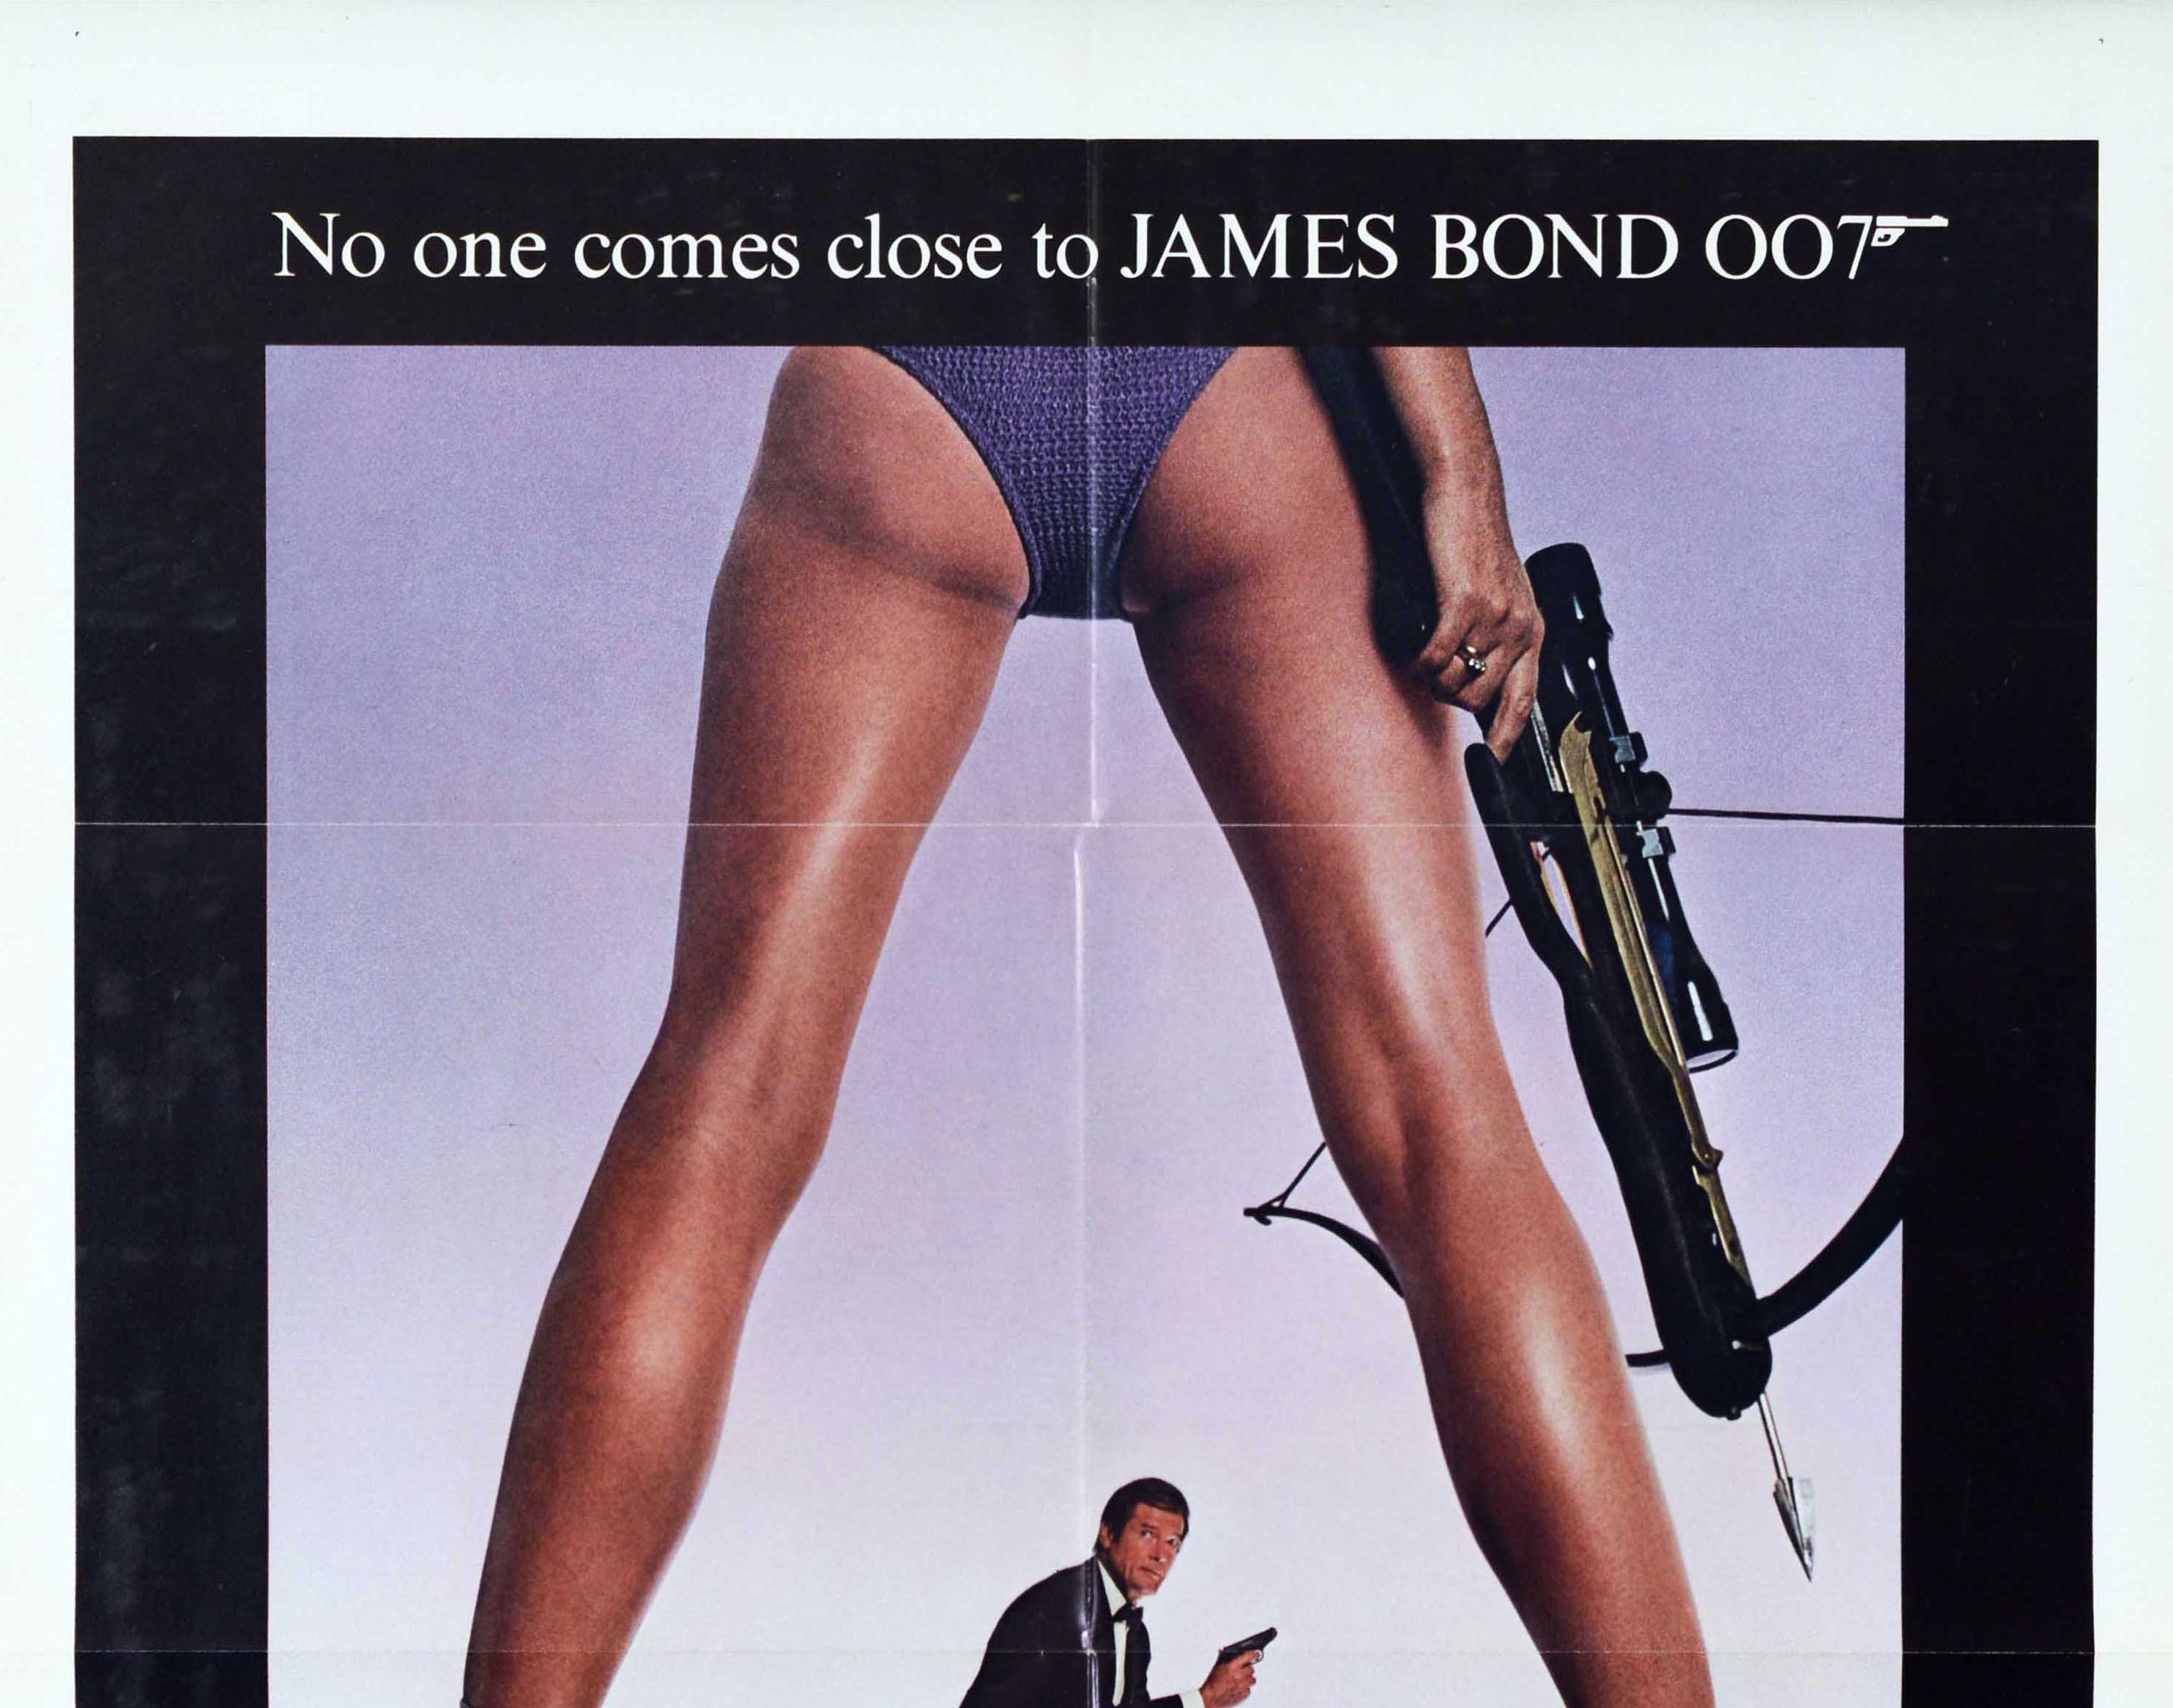 Original vintage film poster for the 007 movie For Your Eyes Only starring Roger Moore, Carole Bouquet and Chaim Topol - No one comes close to James Bond 007 - featuring an image of James Bond in a suit and holding a pistol gun viewed between a pair